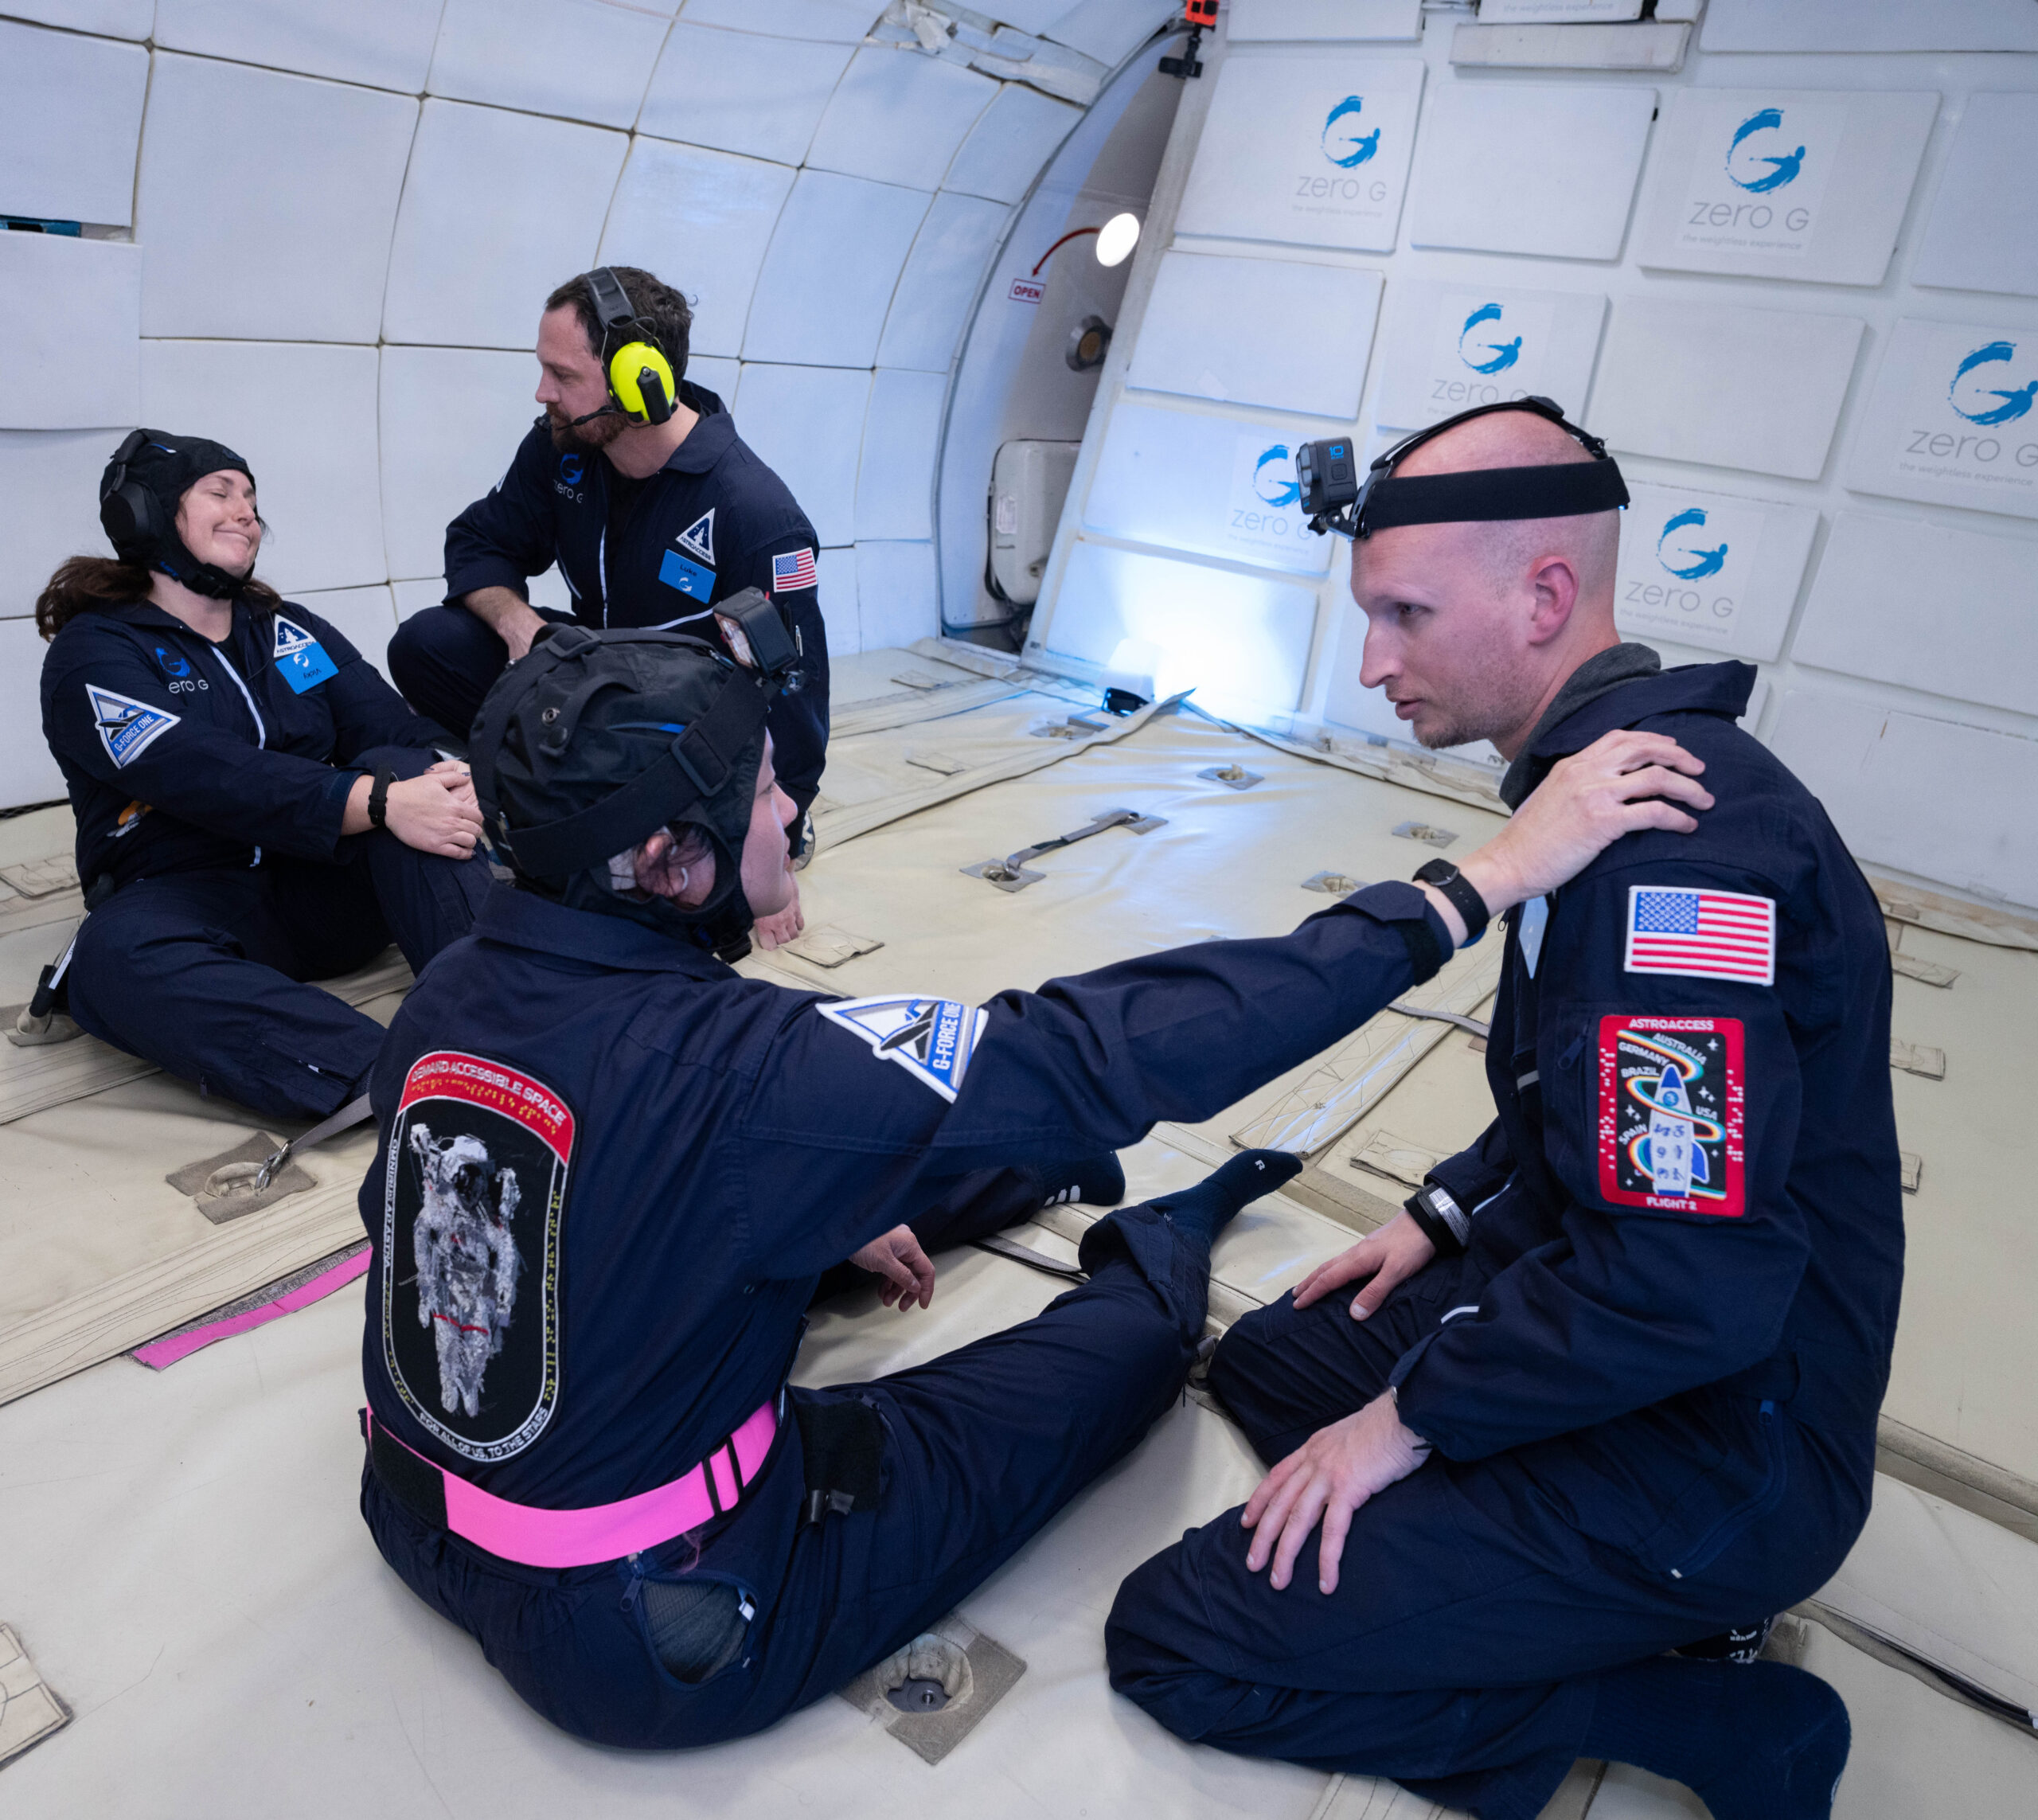 Four ambassadors test out light signaling devices to indicate changes in gravity (Image credit: AstroAccess/Zero G Corporation)